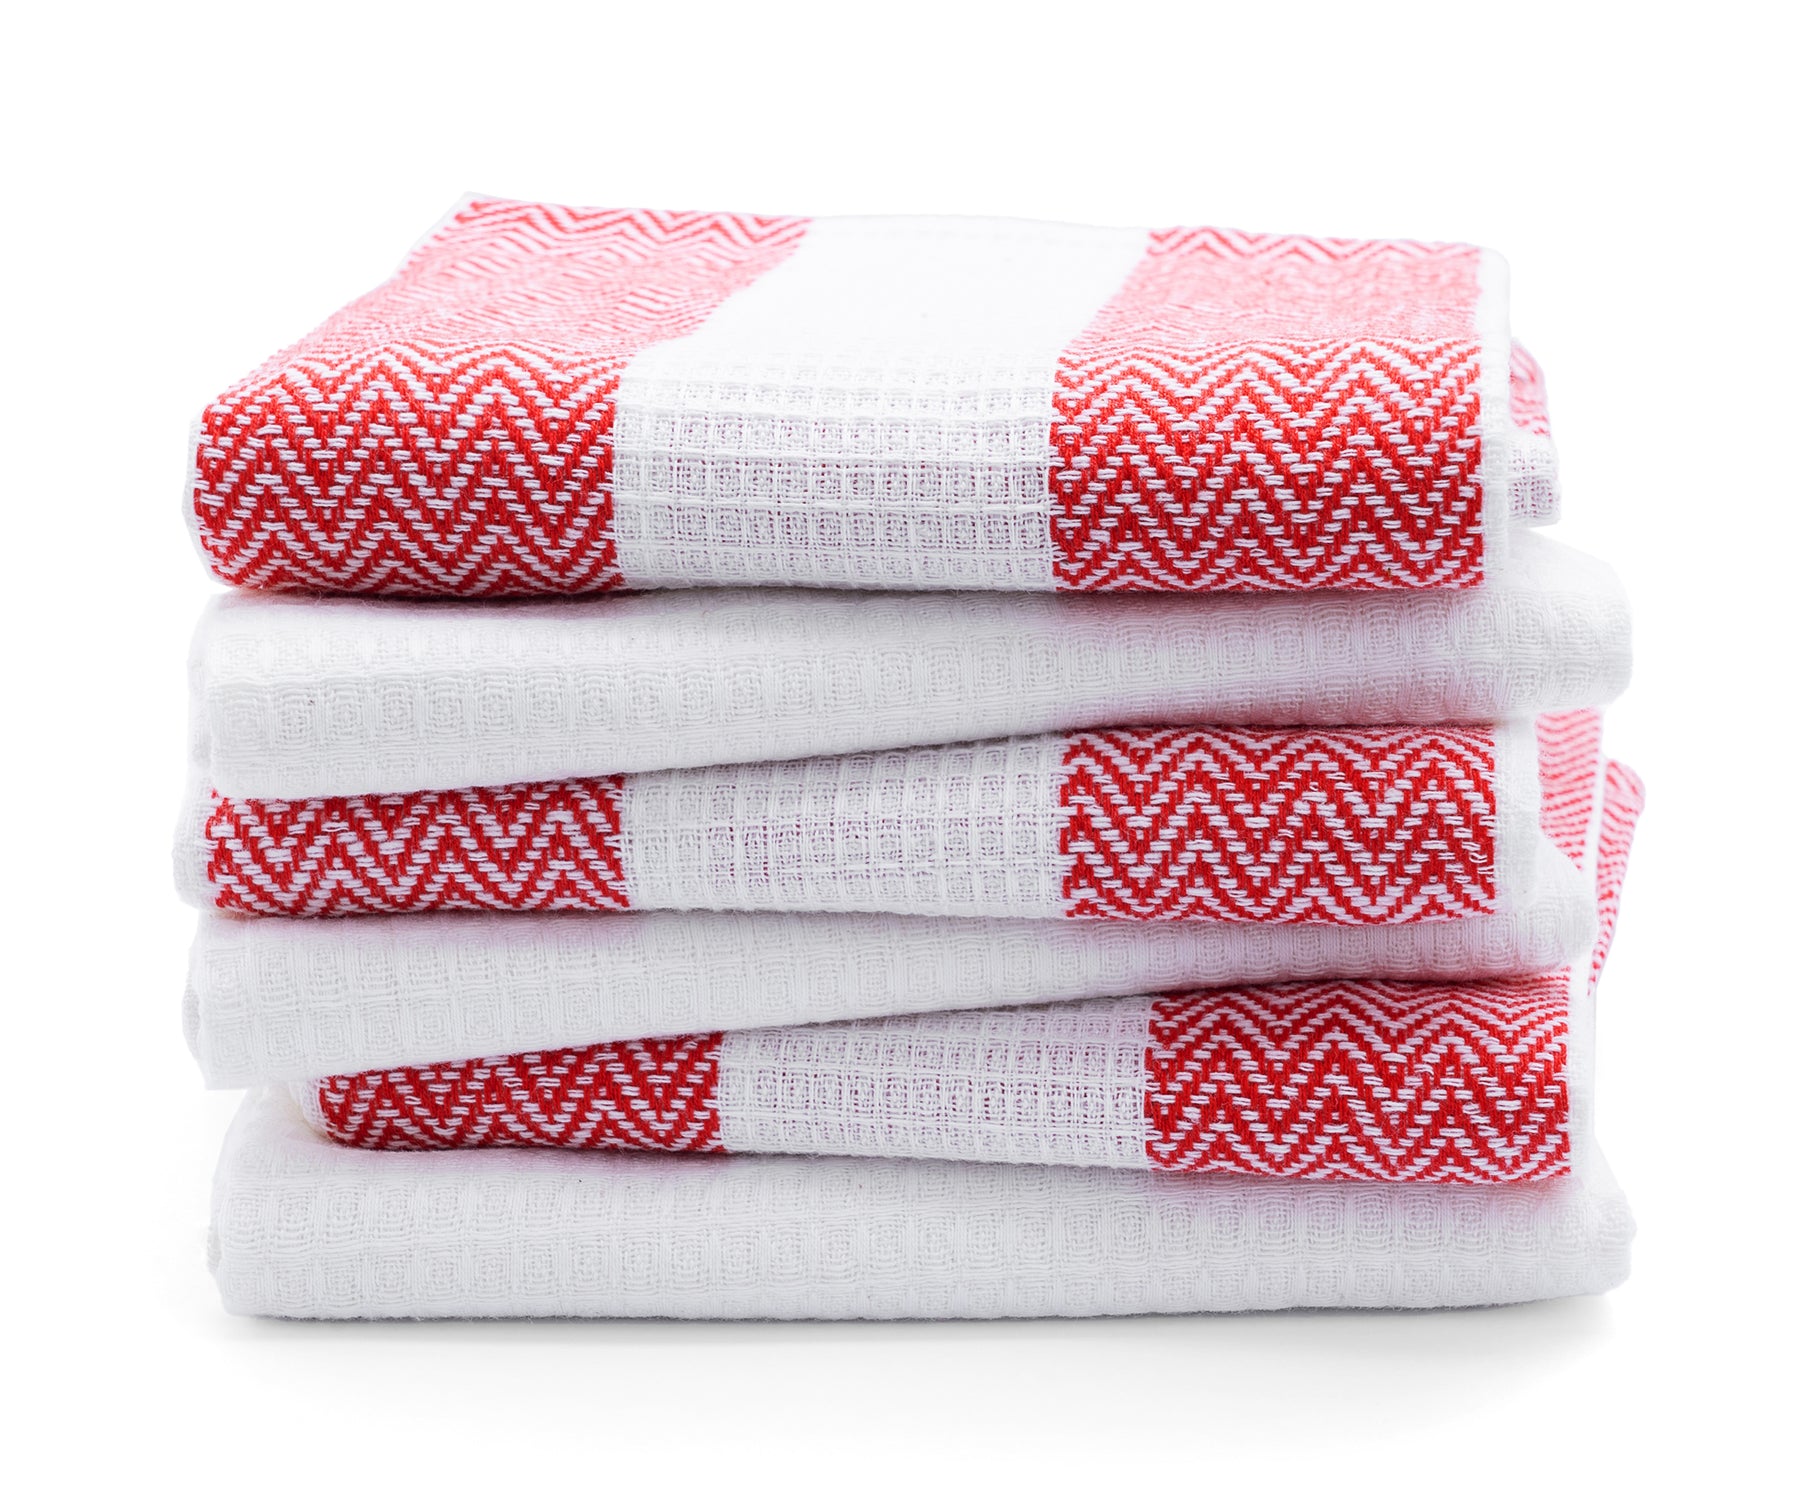 red kitchen towels and white cotton dish towels with red striped patterns, st patrick's day kitchen towels.